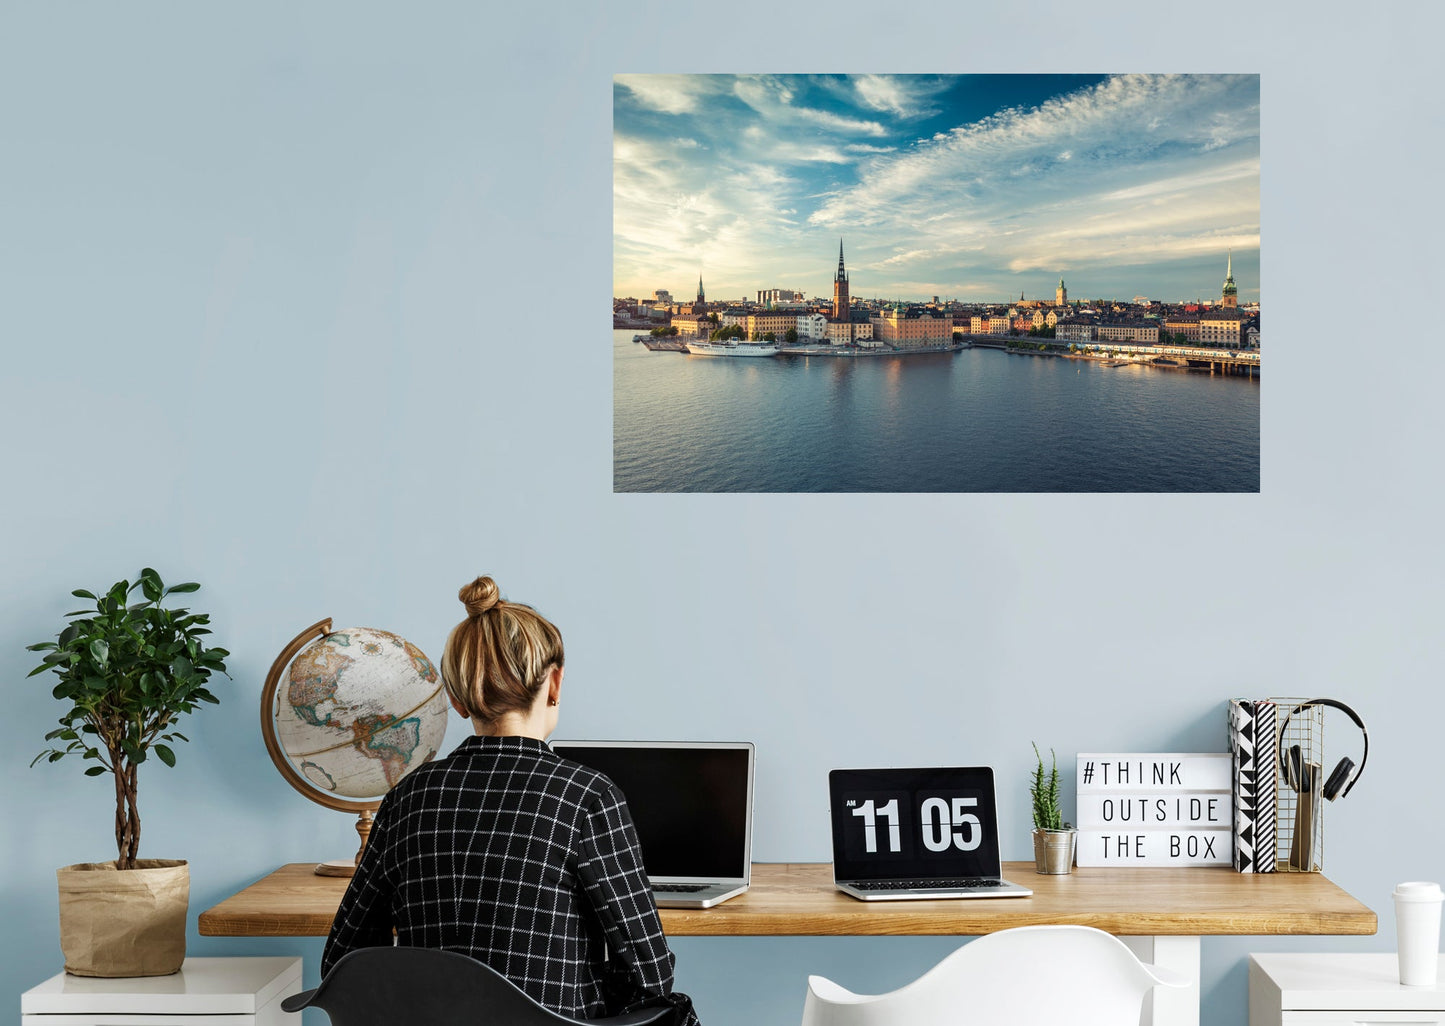 Popular Landmarks: Stockholm Realistic Poster - Removable Adhesive Decal